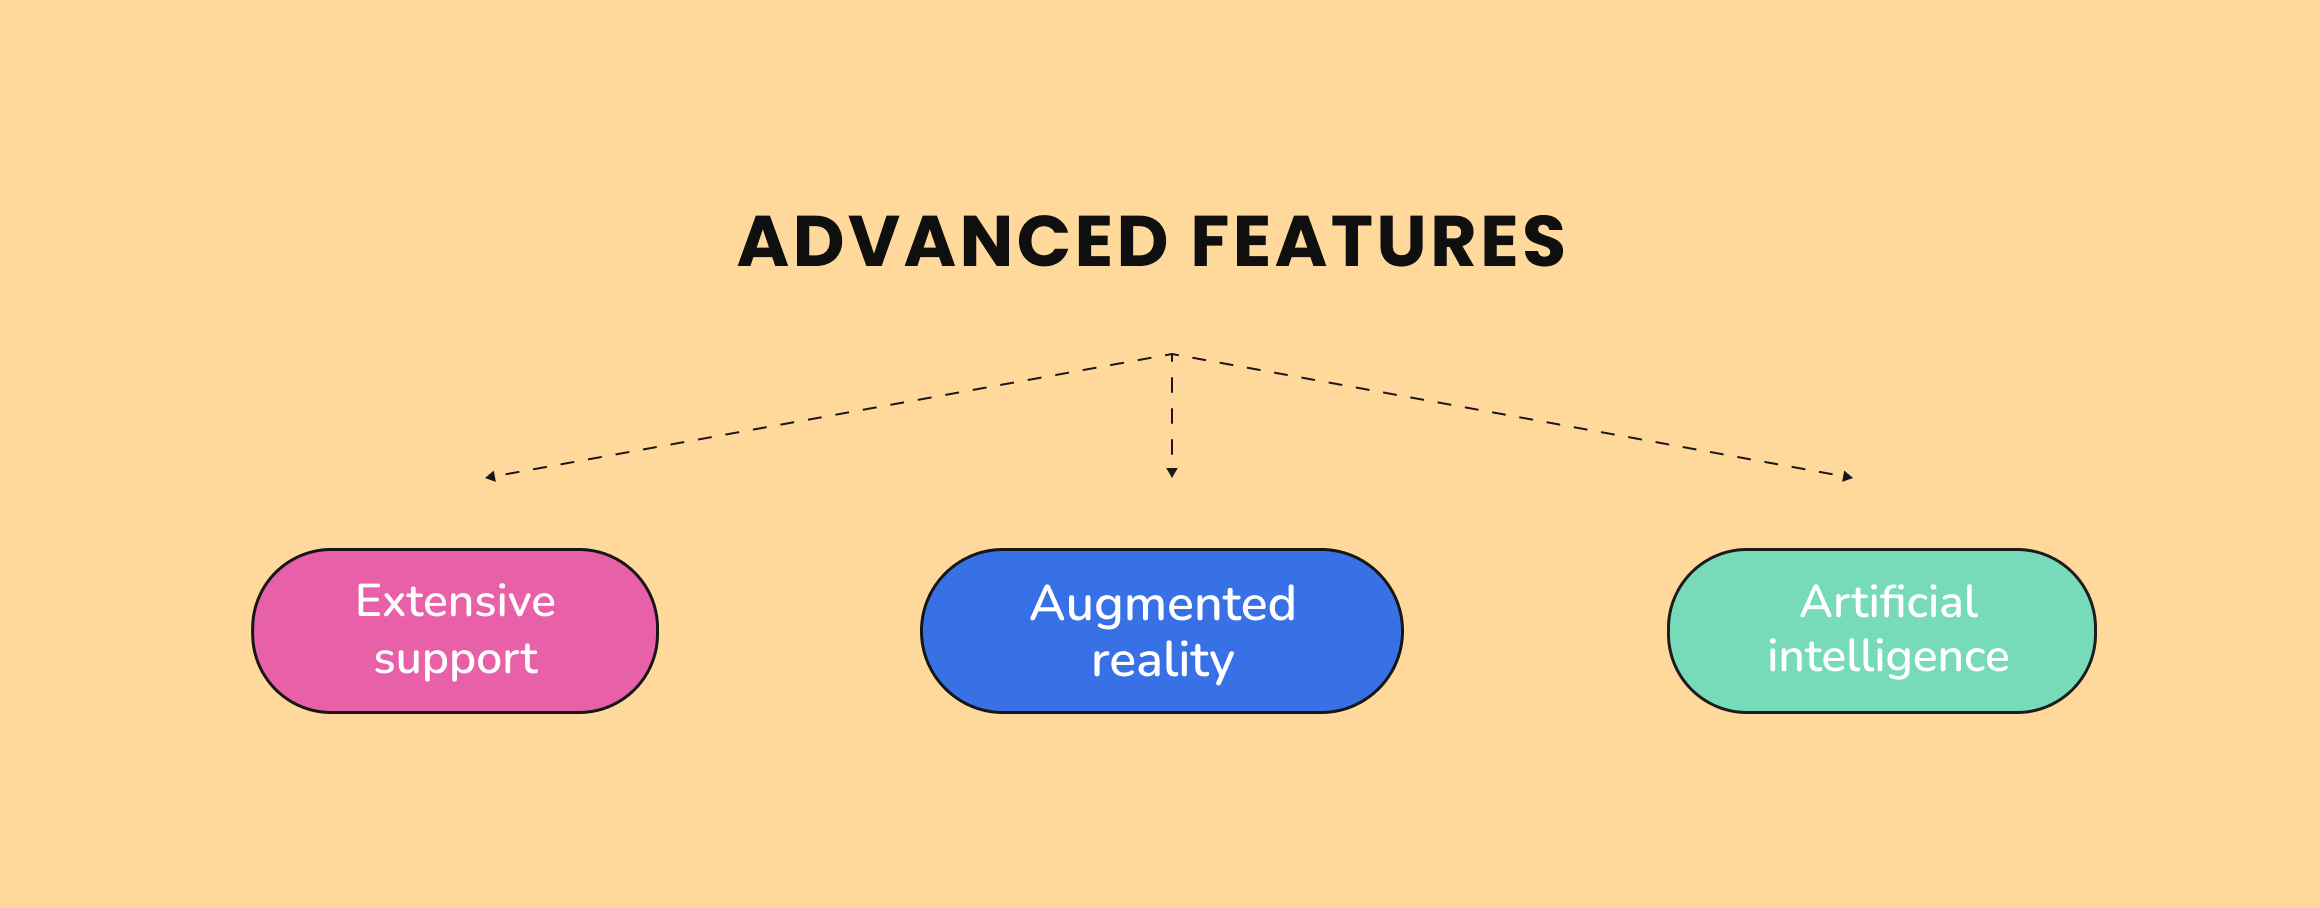 Advanced features